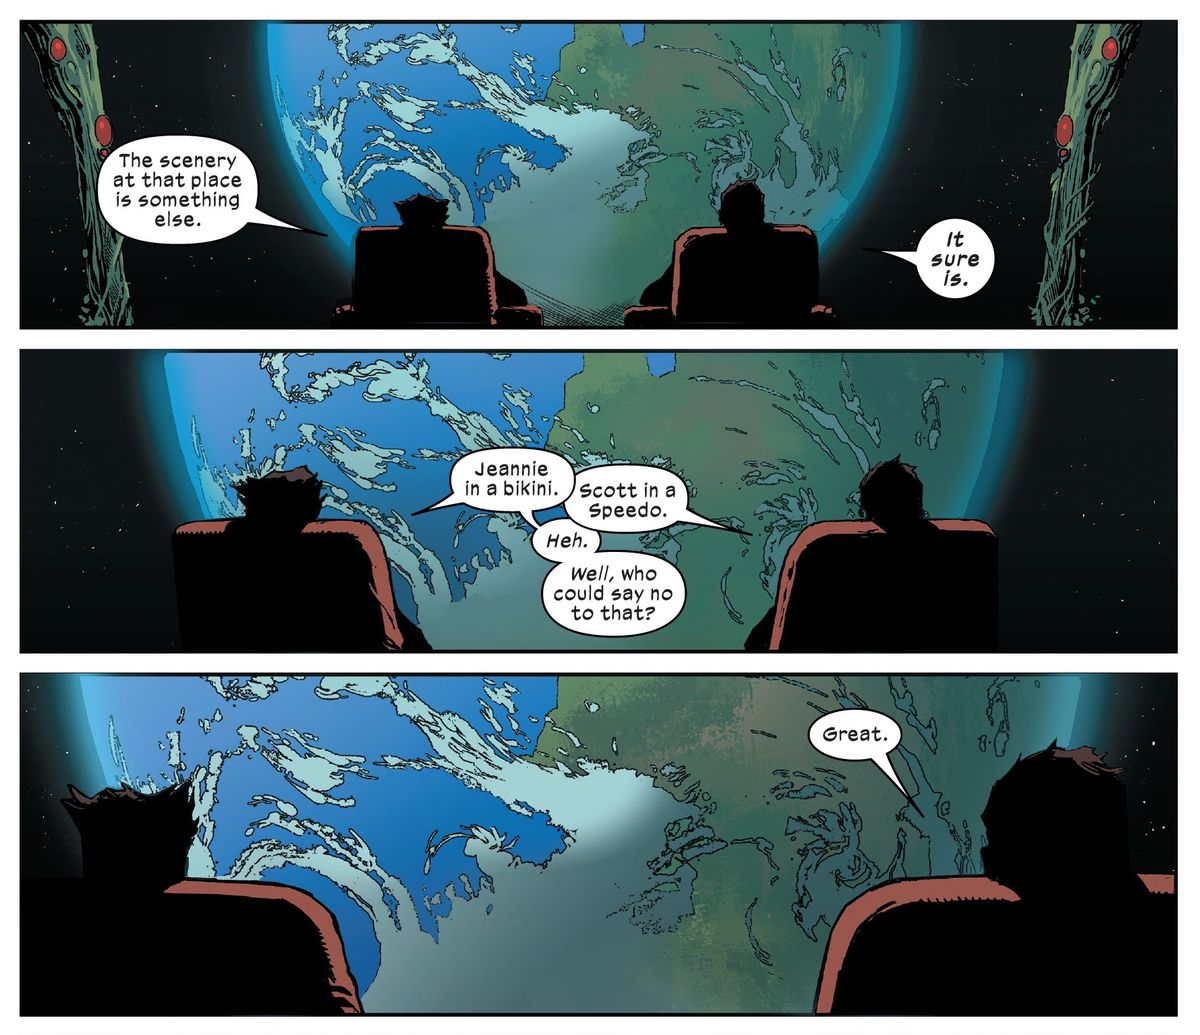 “Jeannie in a bikini,” Wolverine muses. “Scott in a speedo,” Cyclops counters. “Heh.” Wolverine responds. “Well, who could say no to that?” “Great,” Scott says. From X-Men #7, Marvel Comics (2020). 